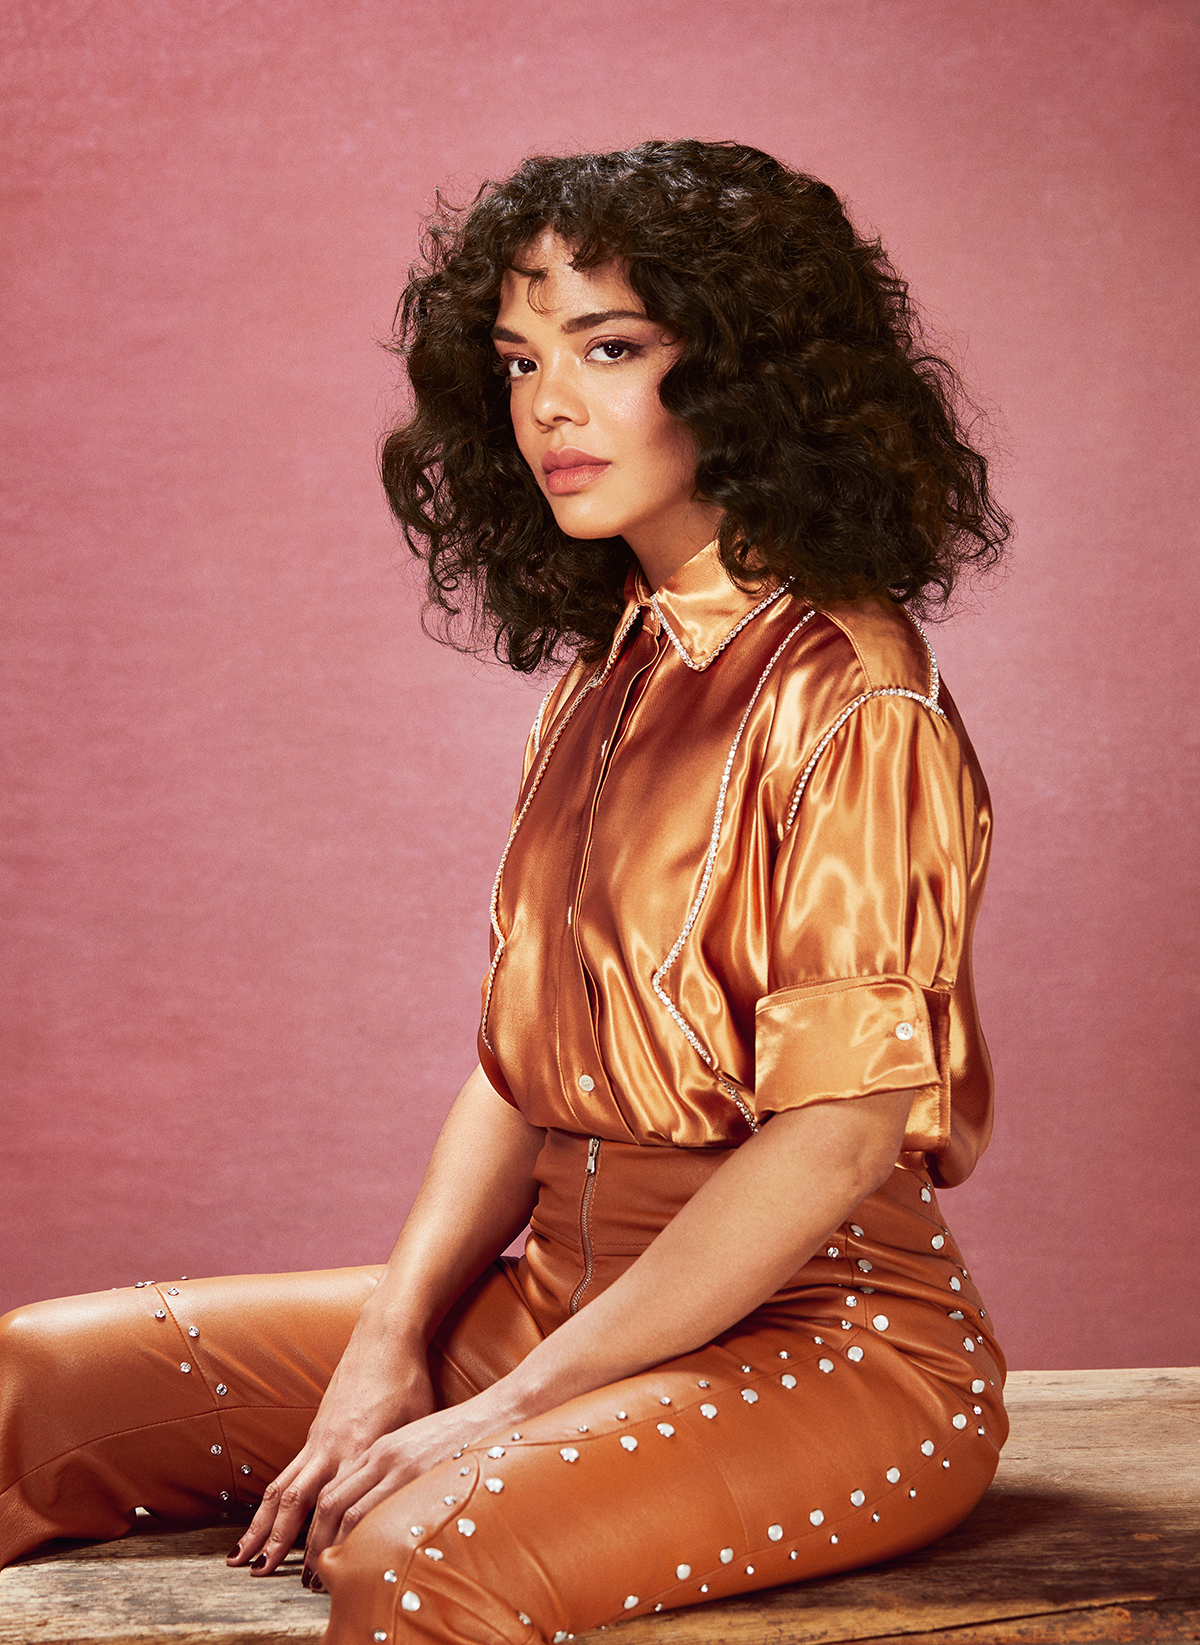 Tessa Thompson in Los Angeles, April 28, 2019. (Gizelle Hernandez for TIME)